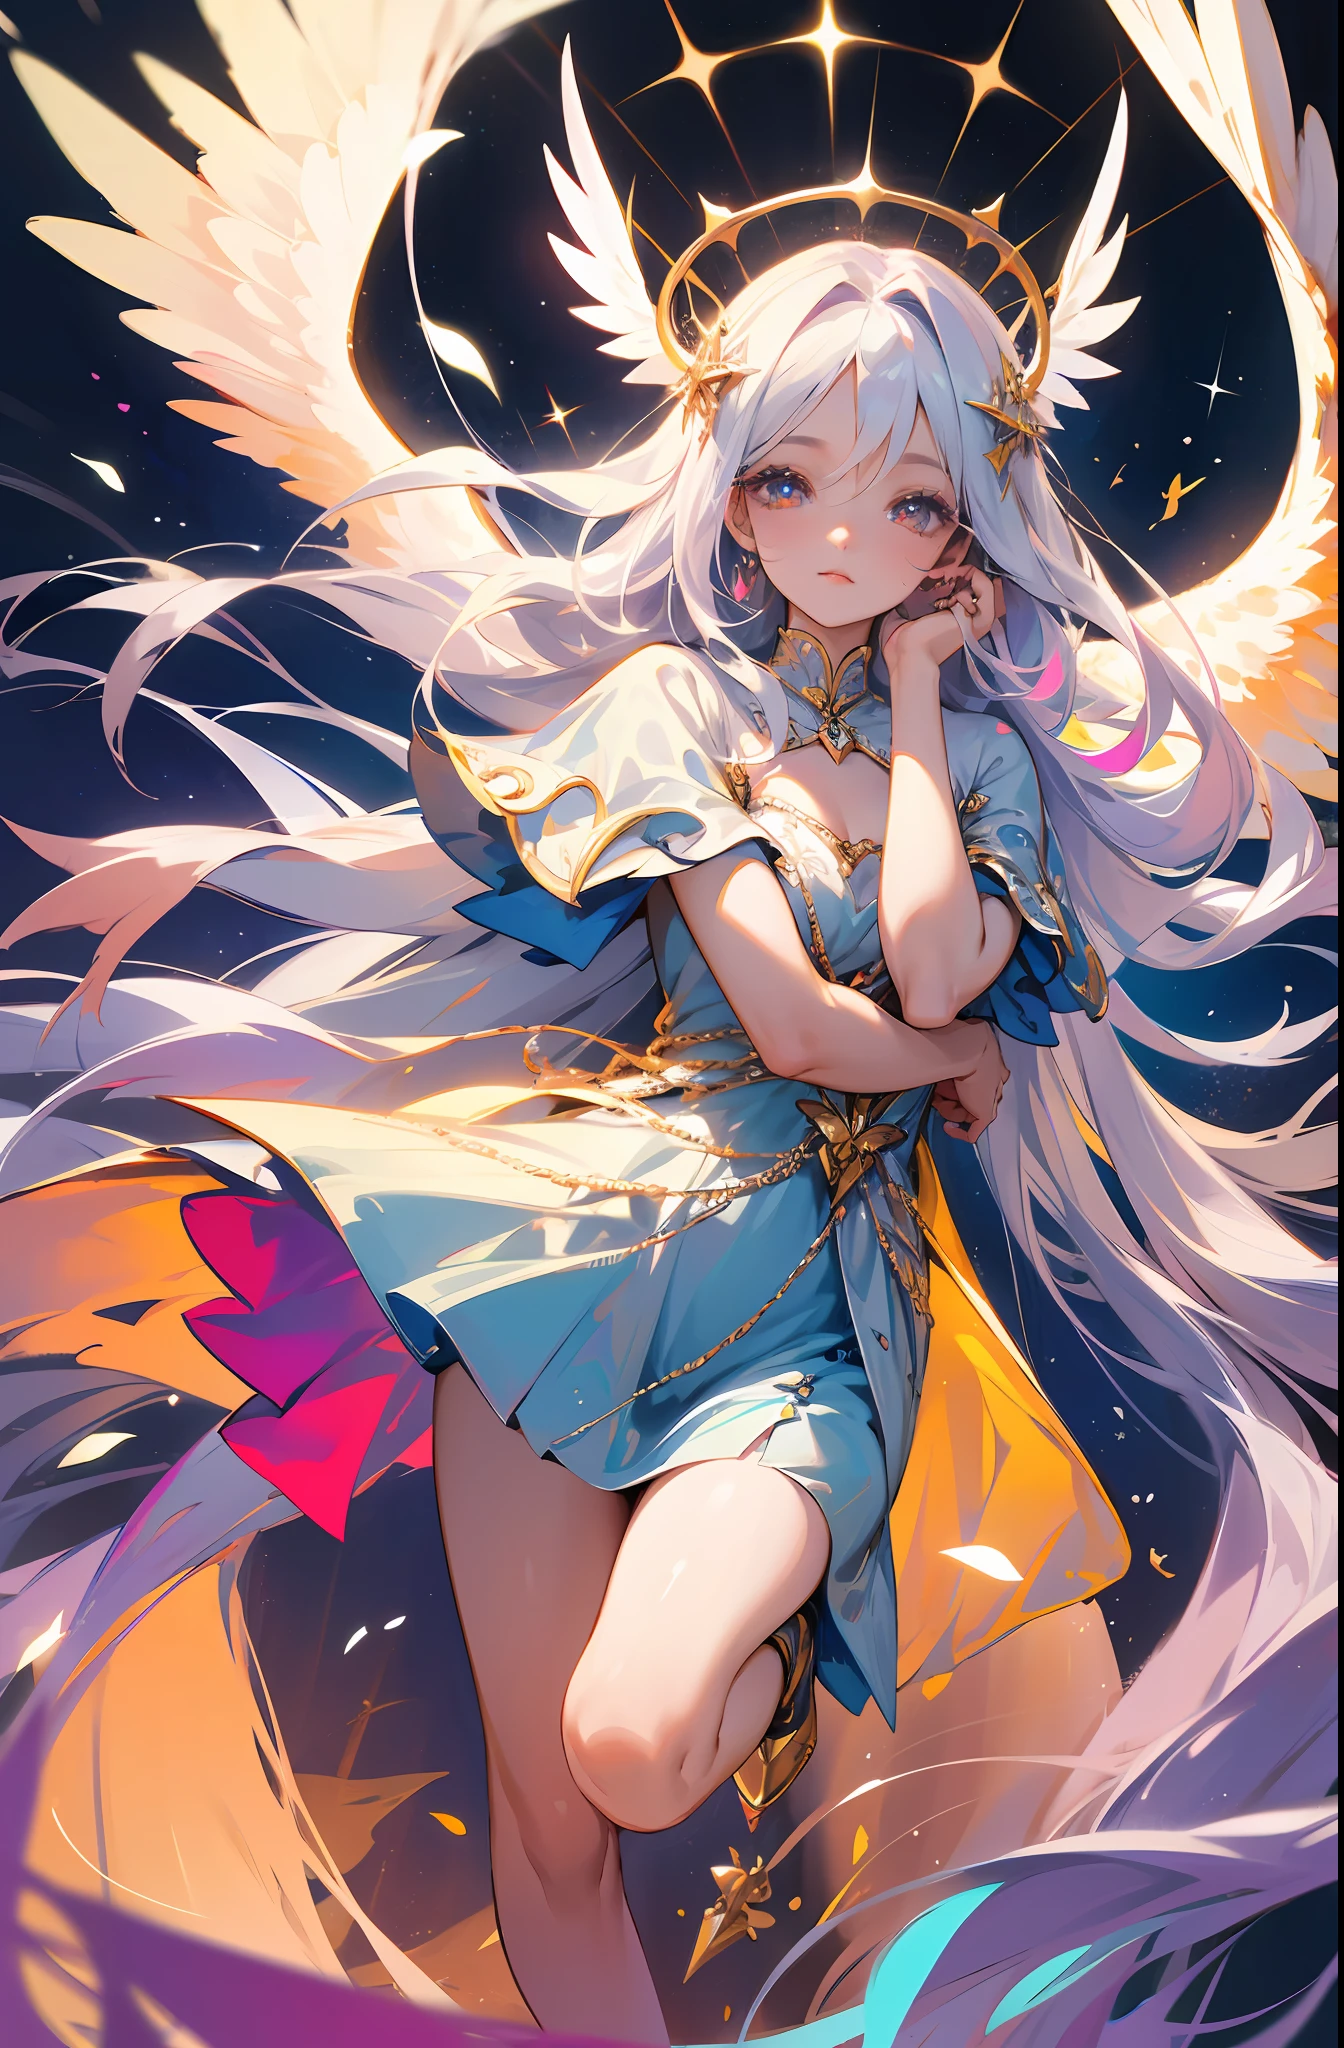 (Masterpiece: 1.4), (Best Quality: 1.4), (Very Cute Angel Girl, Super Detailed Face, Jewel-like Eyes, White Very Long Hair, Colorful Gradient Hair: 1.4), (Angel Ring:
1.4), (Angel Wings: 1.4), (Full body, perfect 2 arms, perfect 2 legs: 1.4), Perfect 4 fingers: 1 thumb, light, shine, bokeh, super fine